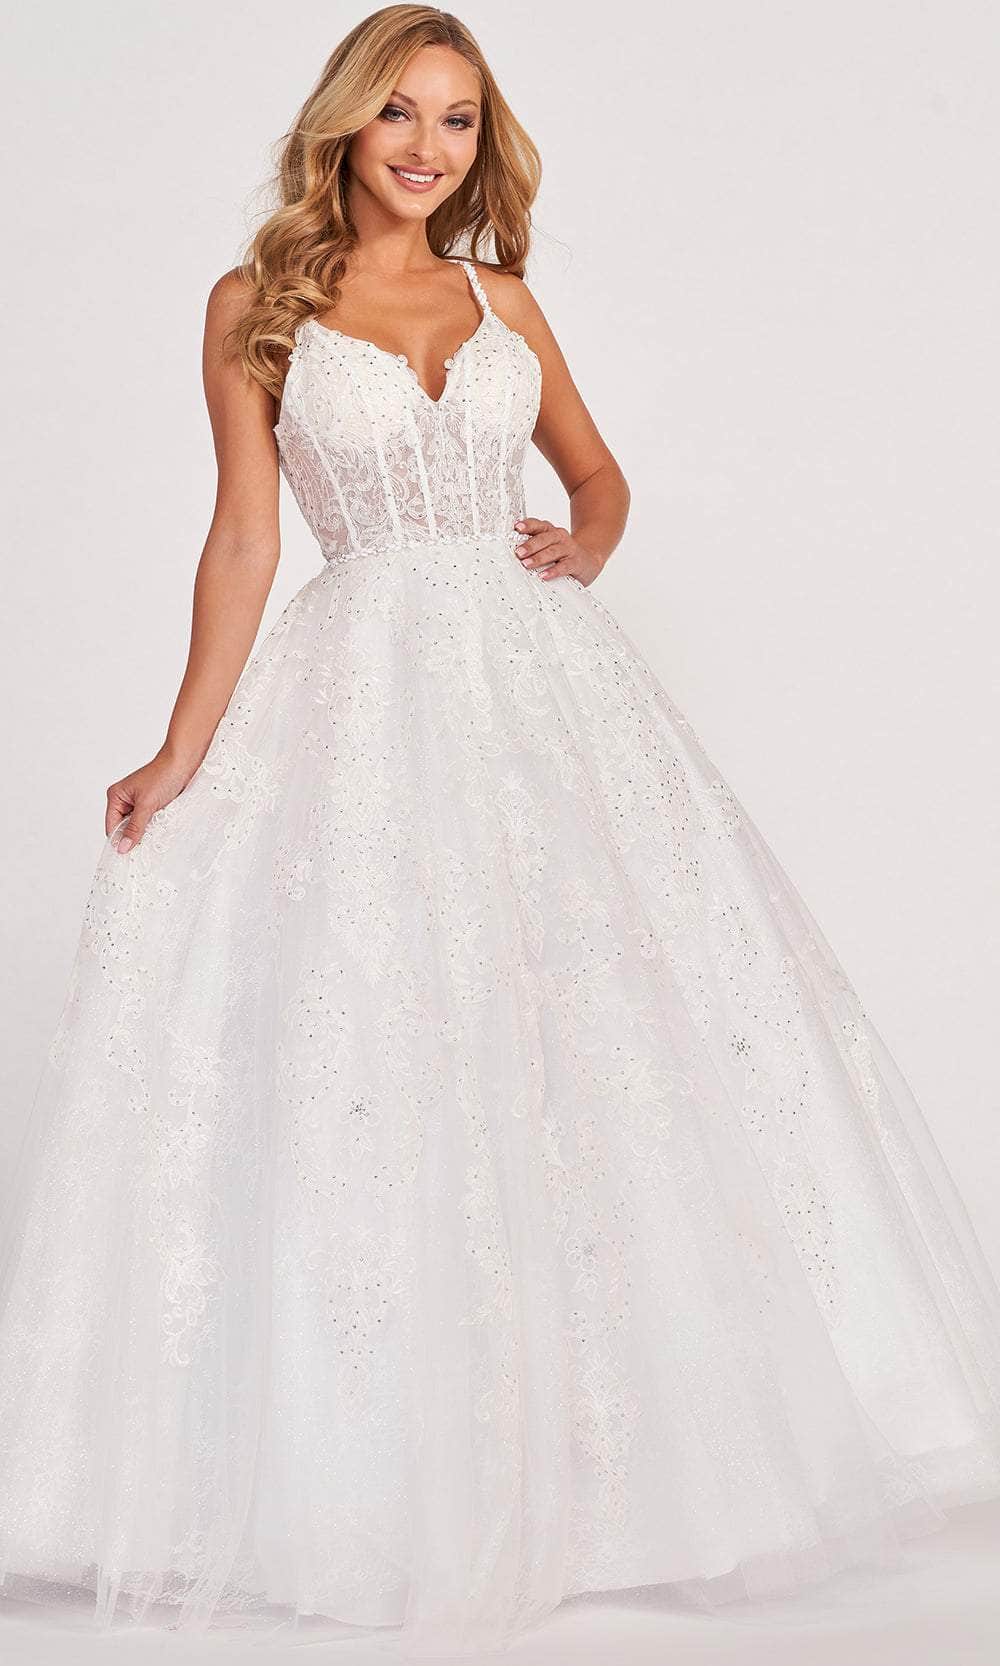 Colette By Daphne CL2026 - Sleeveless Lace-Applique Ballgown Ball Gowns 00 / Diamond White